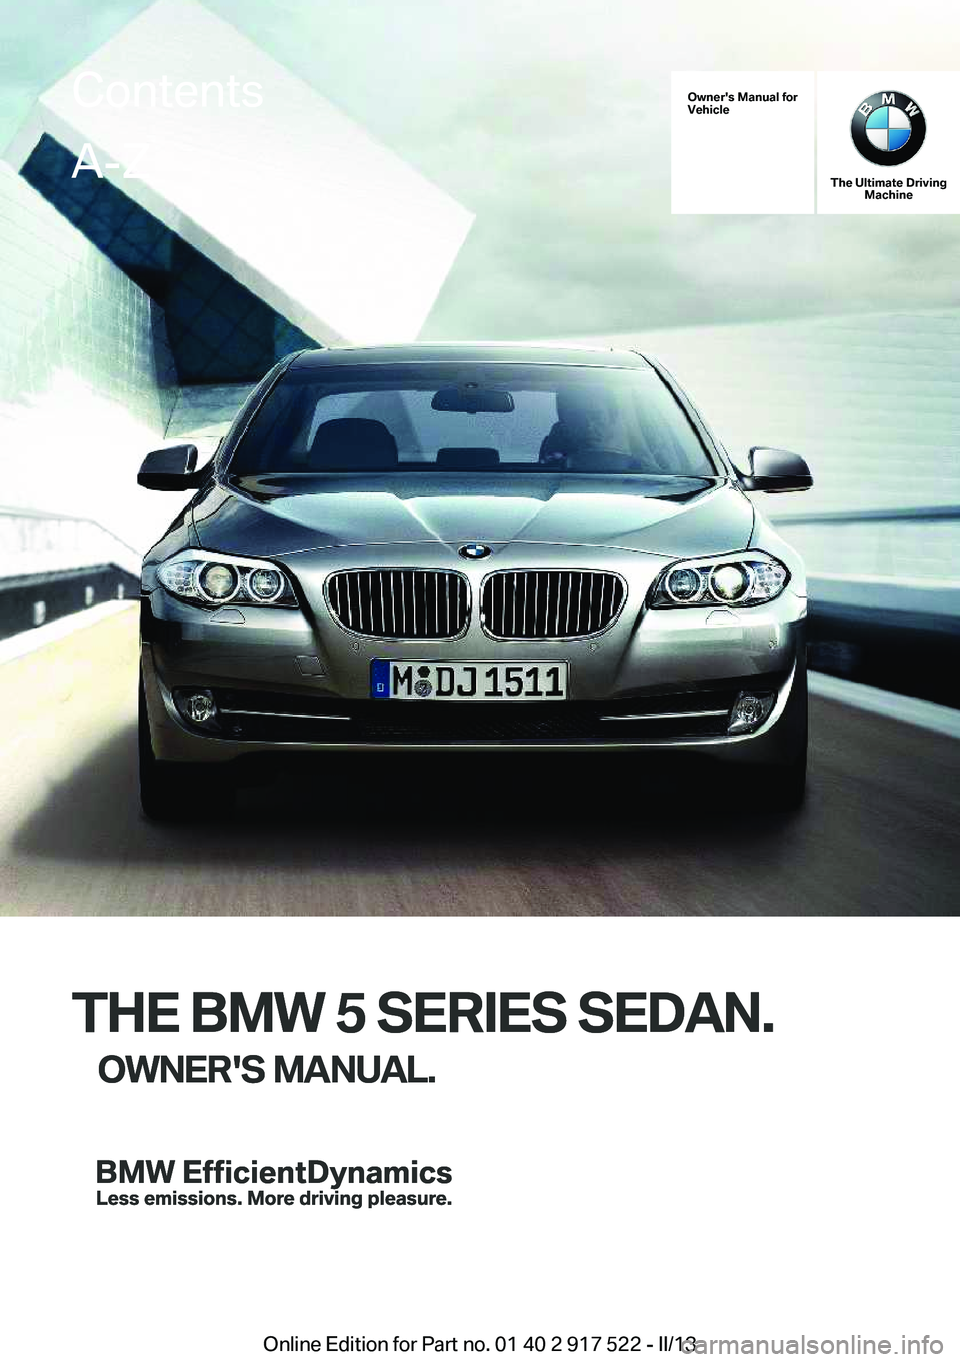 BMW 535I 2013  Owners Manual Owner's Manual for
Vehicle
THE BMW 5 SERIES SEDAN.
OWNER'S MANUAL.
The Ultimate Driving Machine
THE BMW 5 SERIES SEDAN.
OWNER'S MANUAL.
ContentsA-Z
Online Edition for Part no. 01 40 2 917 